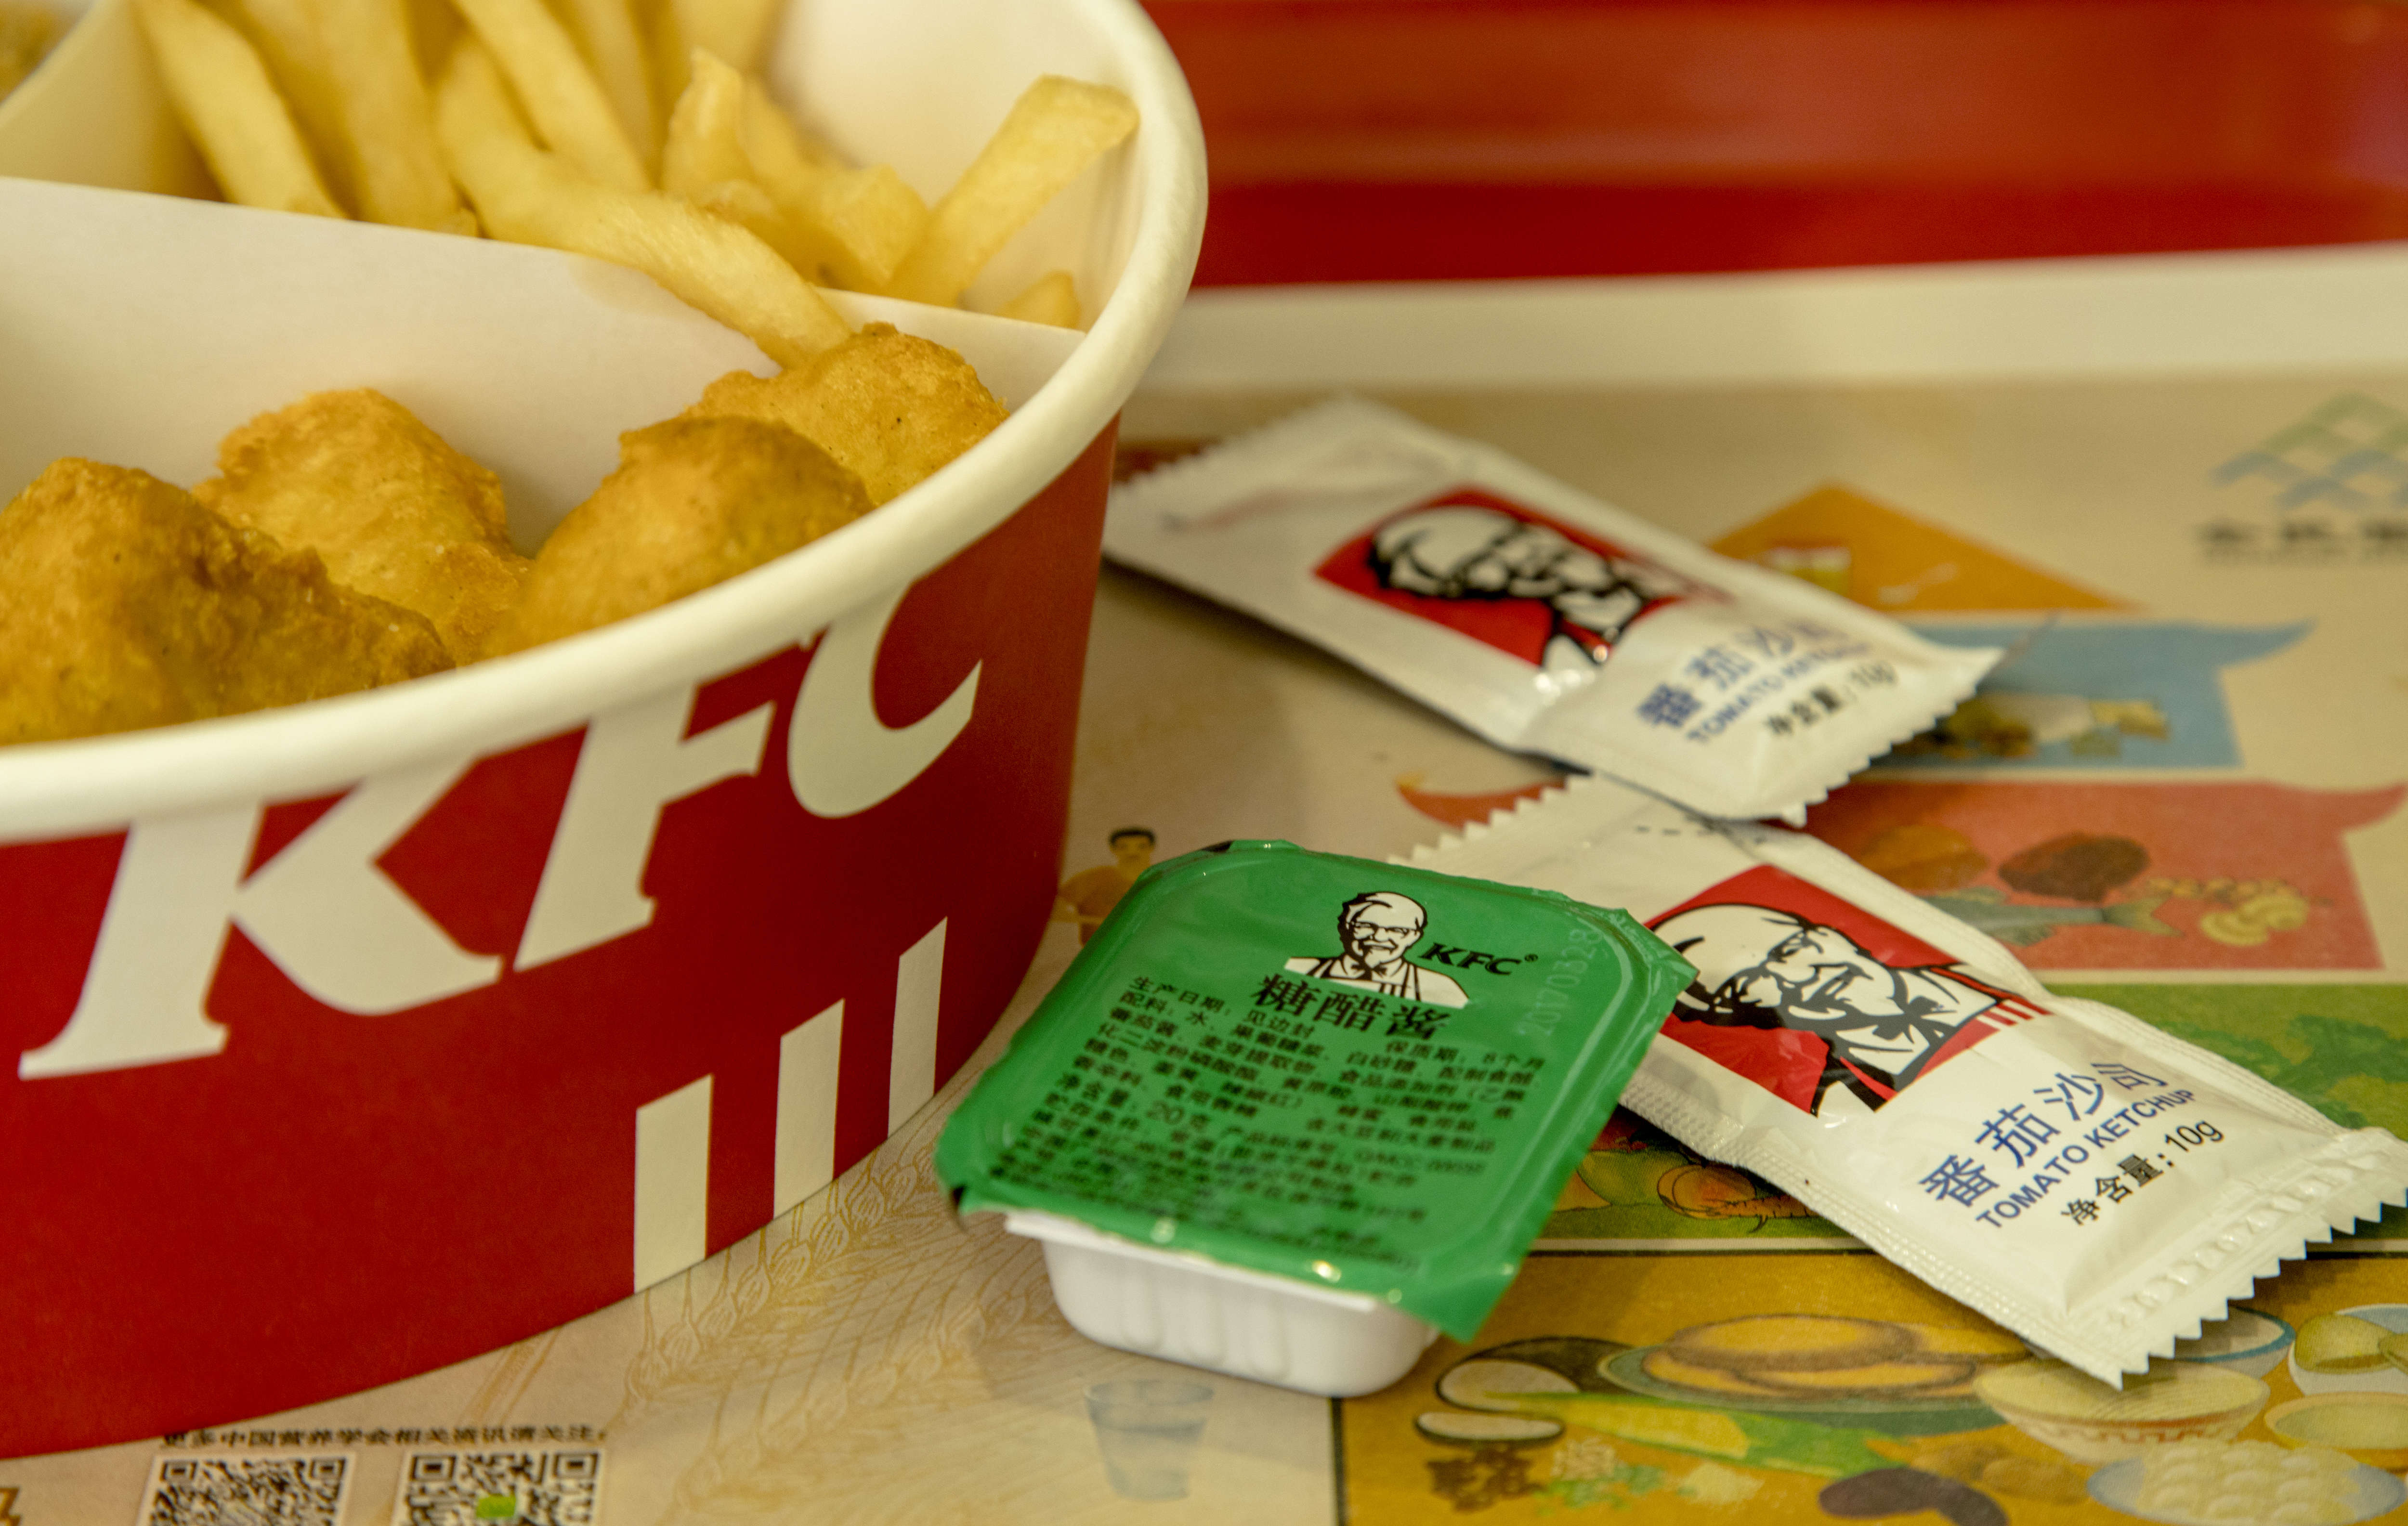 KFC food box filled with fried chicken and chips. Since...